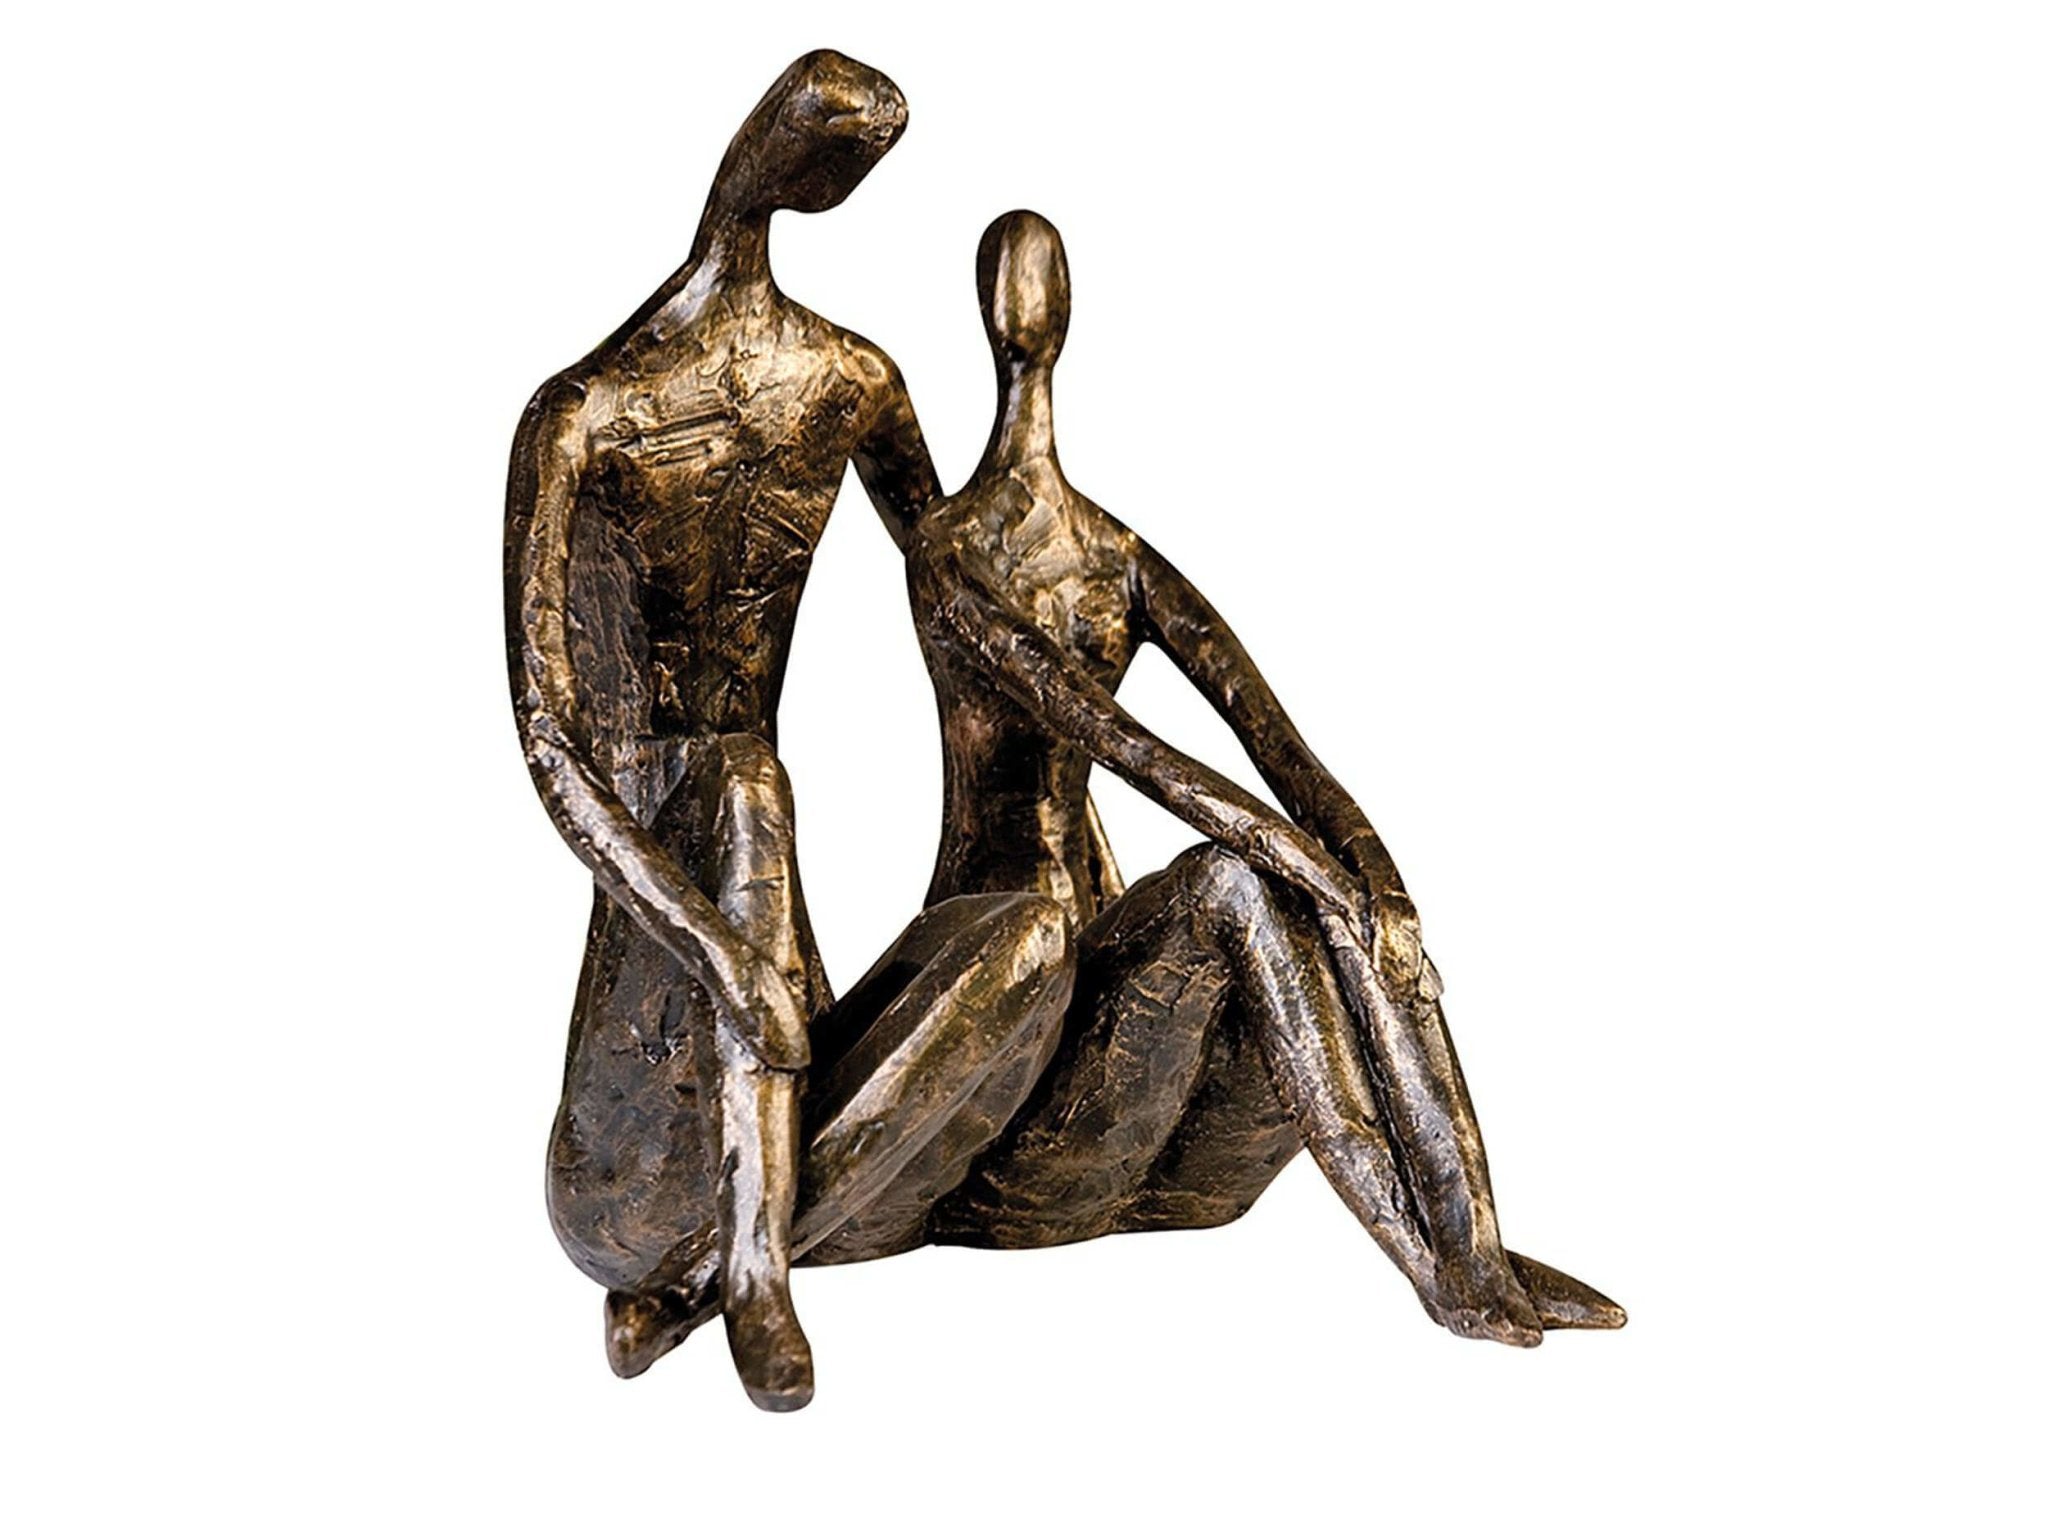 Seated lovers sculpture - Bronze | Date | H. 25.5 cm